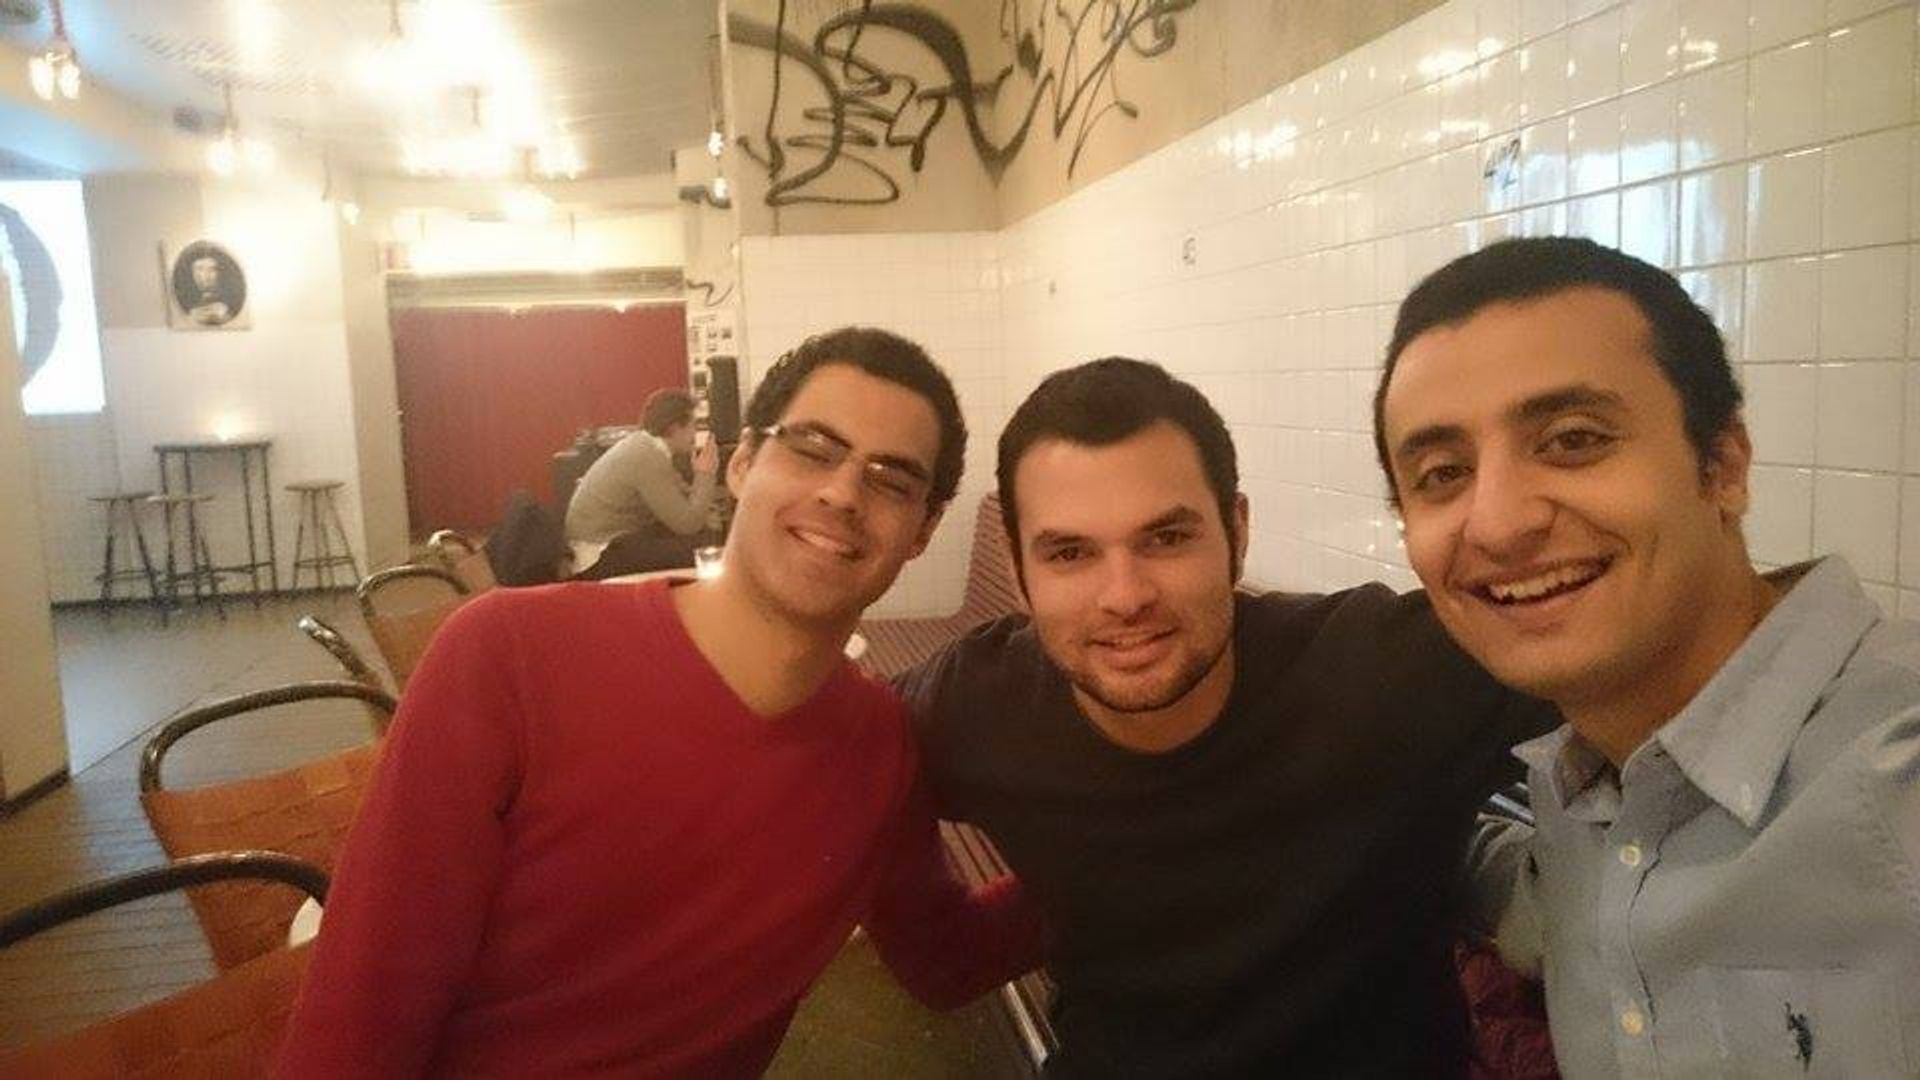 From left to right- my pals Omar, Louis and Magdy- from Egypt, Mexico, and Egypt respectively.